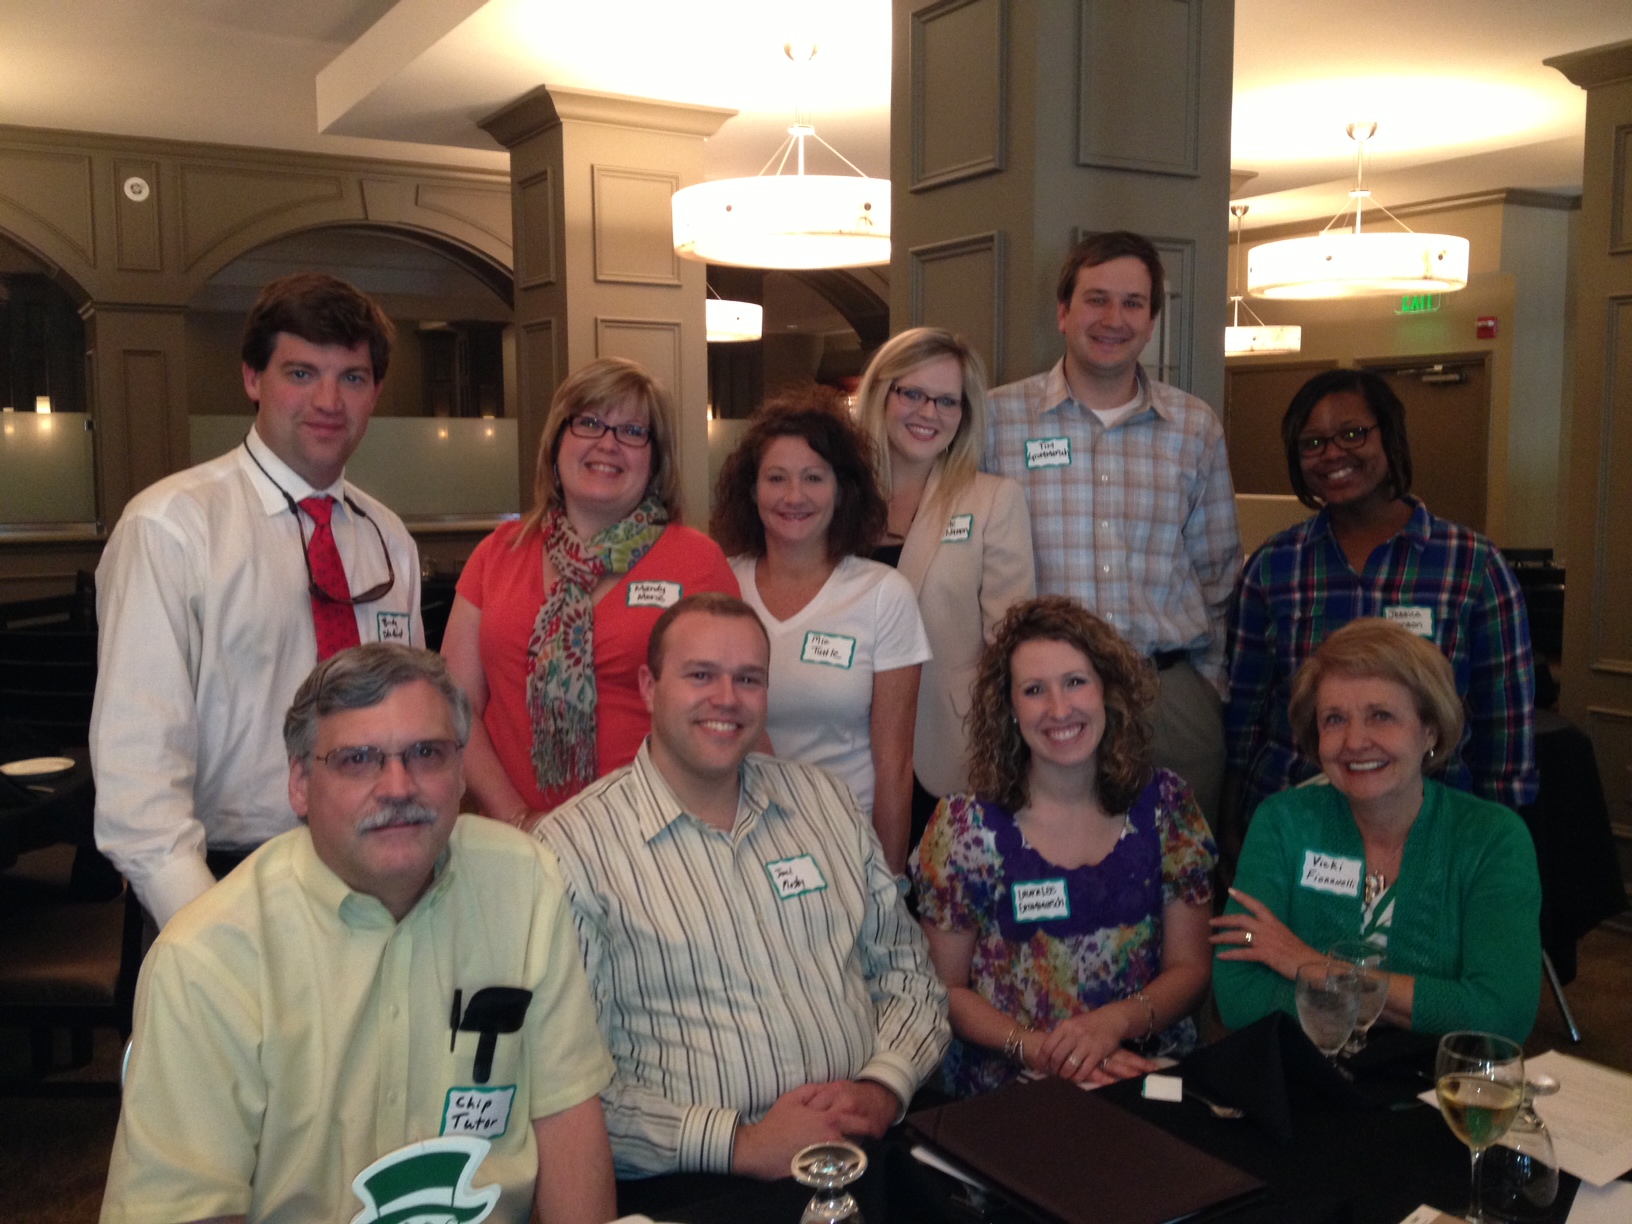 PHOTO:  Front Row (L to R): Chip Tatum, Joel Mosby, Laura Lee Grommersch, Vicki Fioranelli. Back Row (L to R) Brady Stanford, Mandy Morse, Mia Fioranelli Tuttle, Kate Kinnison Van Namen, Tim Grommersch, and Jessica Johnson at the Memphis chapter planning meeting at the Racquet Club in Memphis.